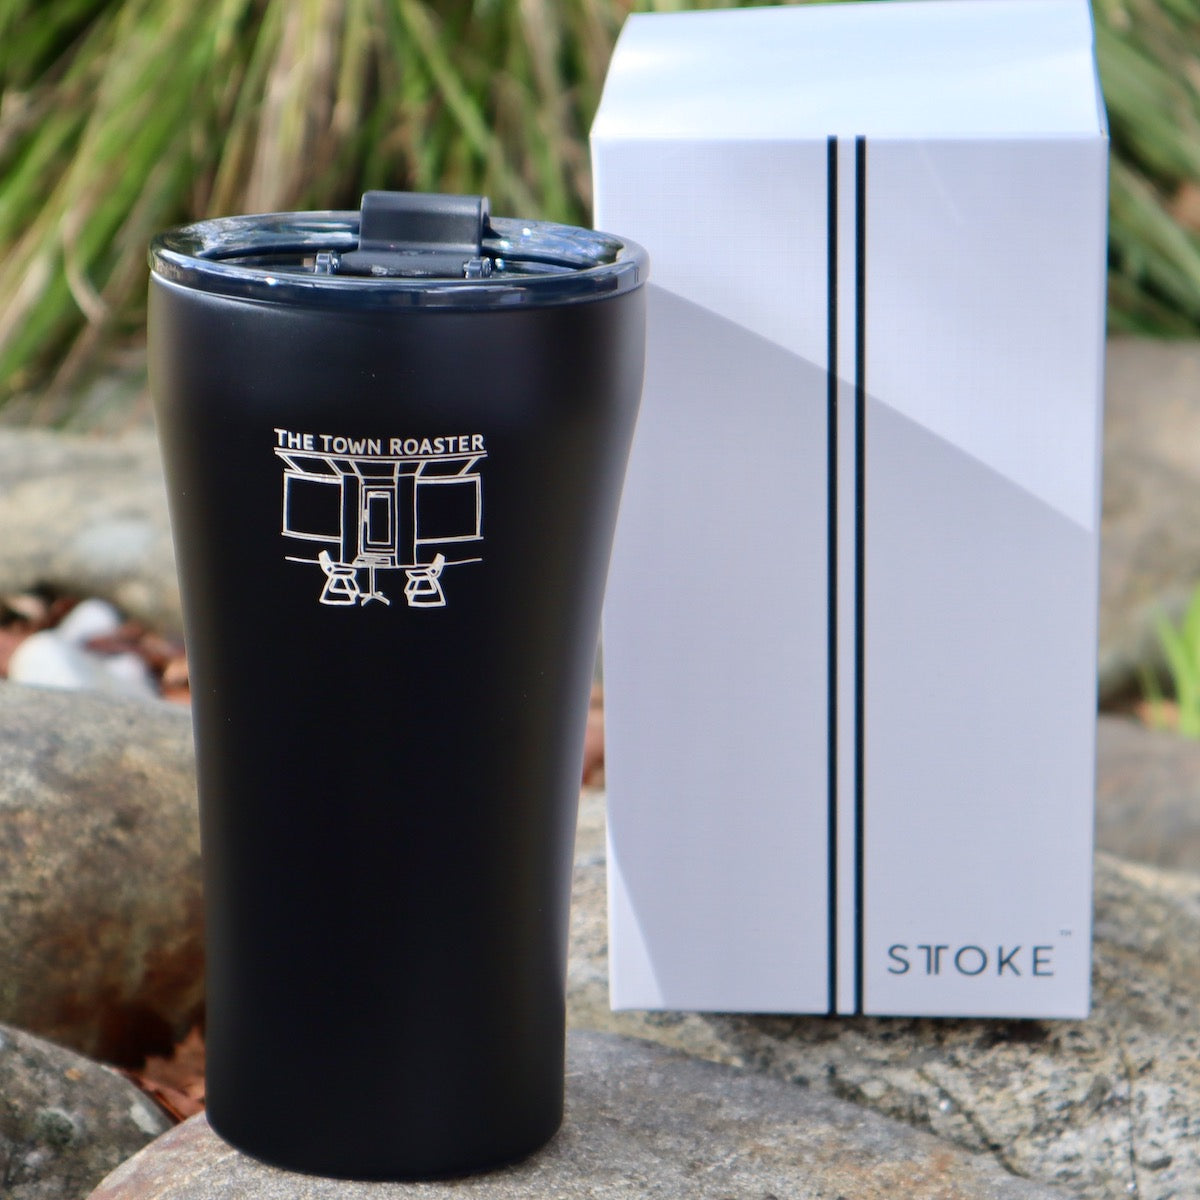 Sttoke 12oz Reusable Cup Coffee cup from The Town Roaster